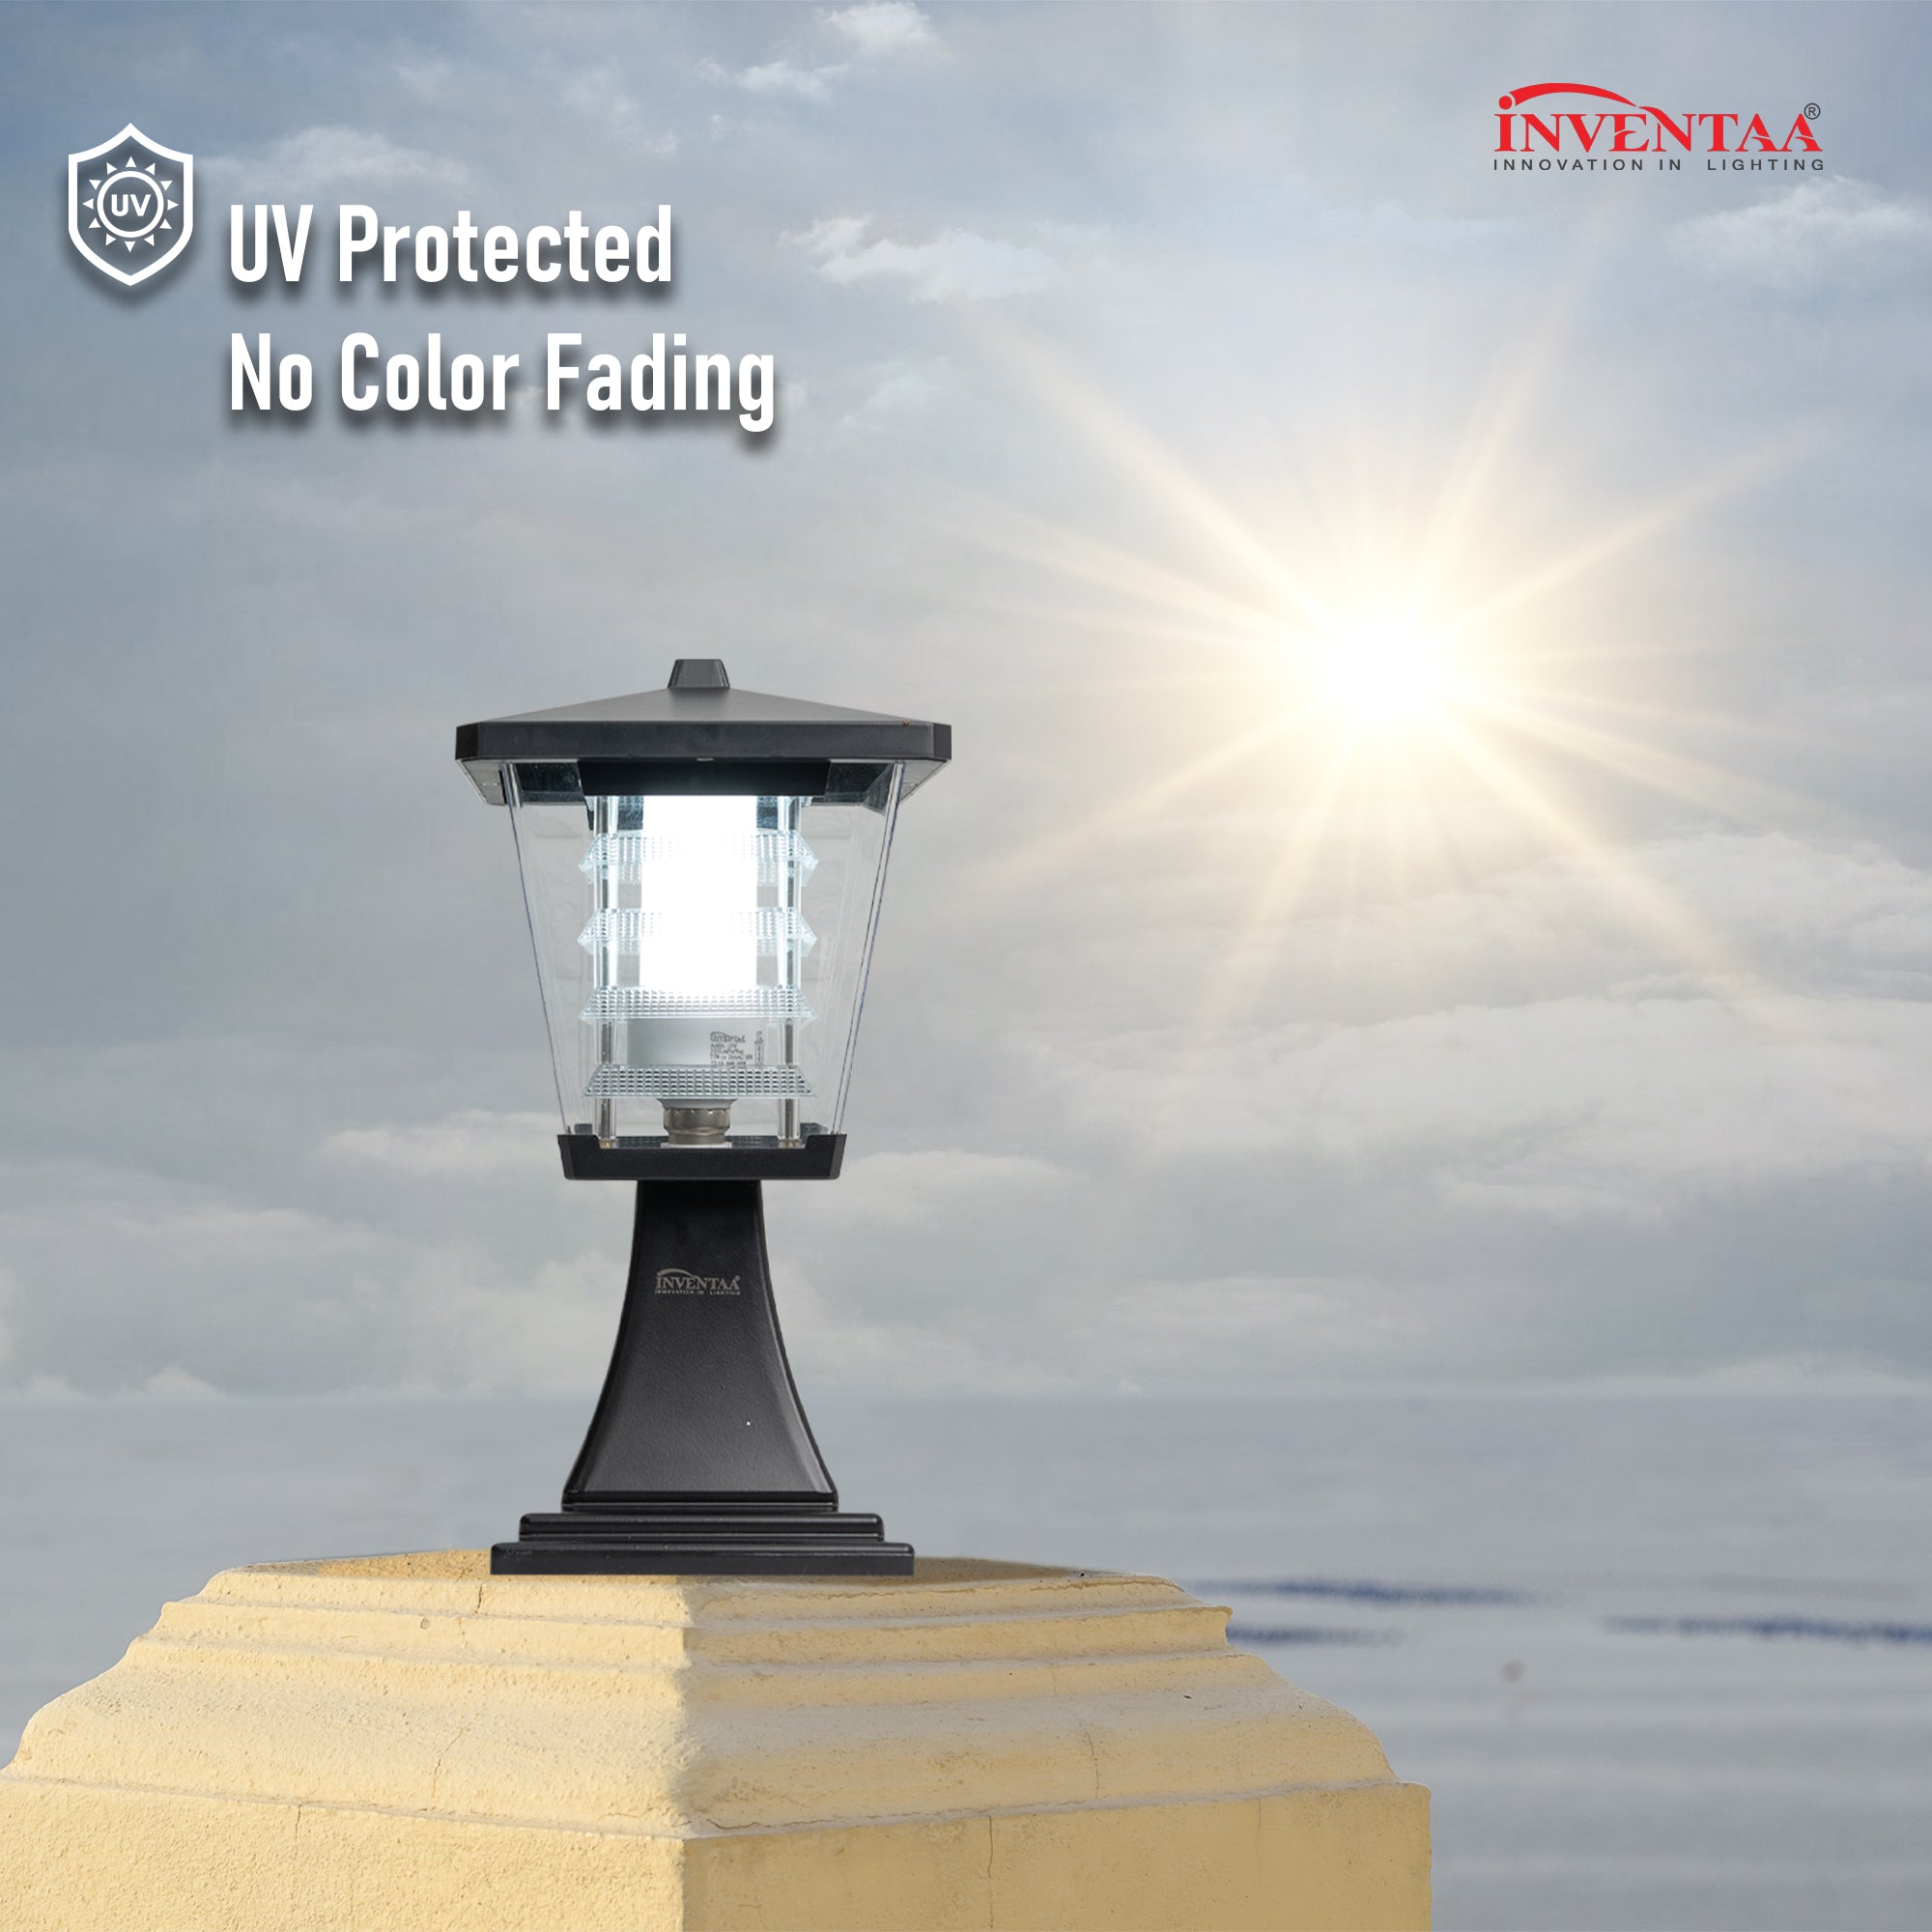 Mini glasis warm white led gate light with UV protection and no color fading #bulb options_warm